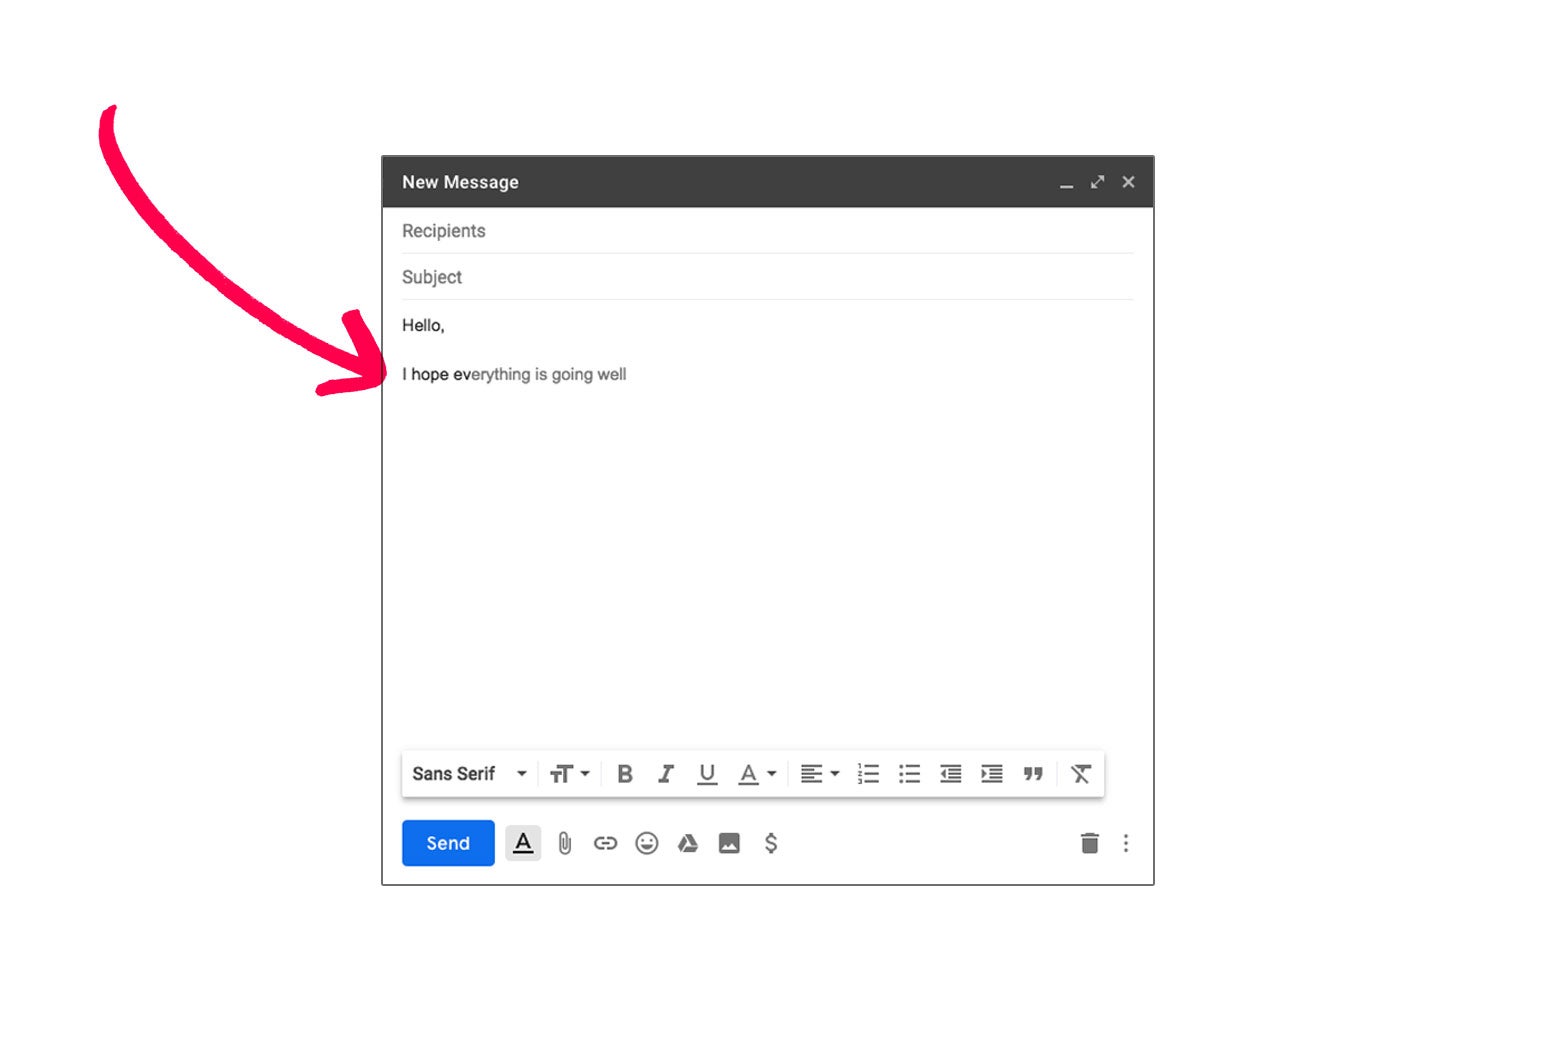 After a person types "I hope ev," Gmail fills in "everything is going well" to complete the sentence.